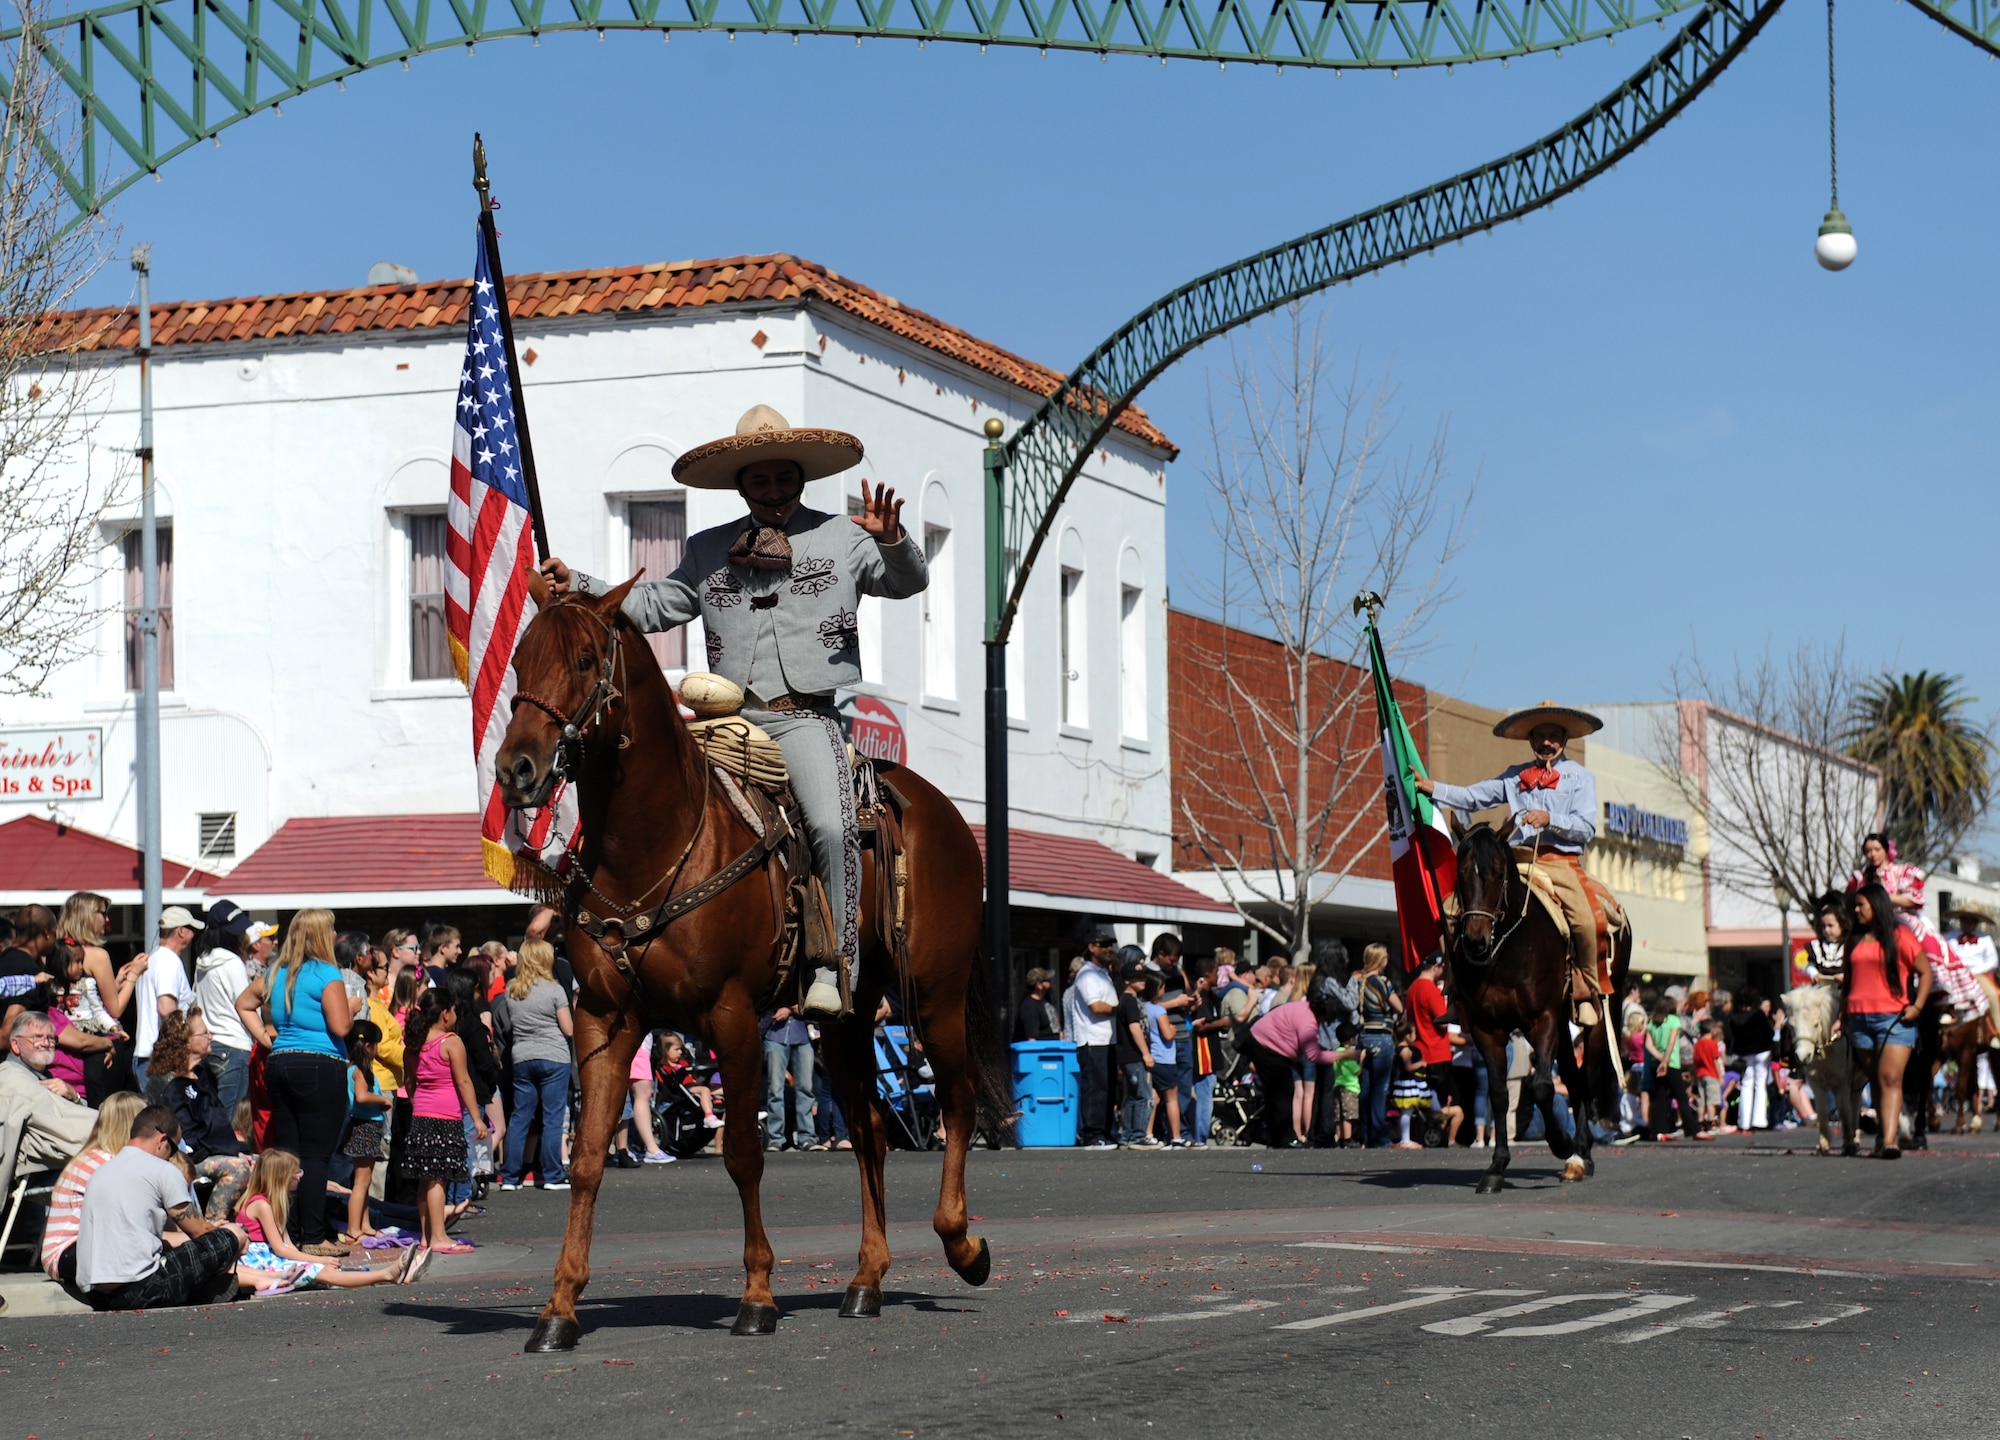 Horse riders march in the Bok Kai Festival in Marysville, Calif., March 16, 2013. The festival celebrates Bok Kai, the Chinese god of the North. (U.S. Air Force photo by Staff Sgt. Robert M. Trujillo/Released)